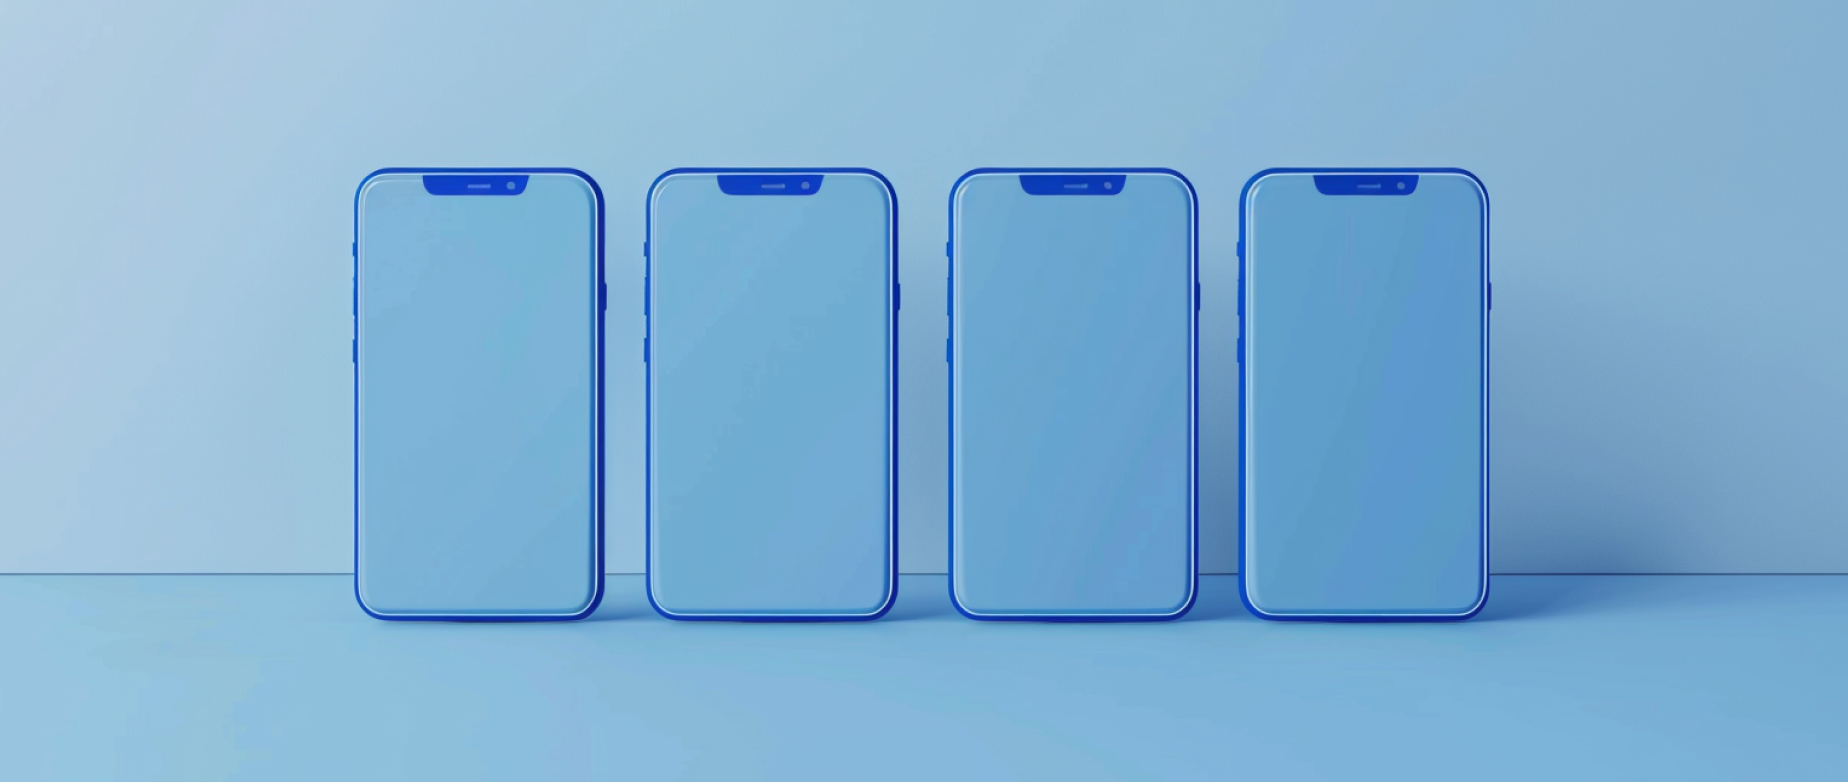 Four smart phones next to each other on a blue background.